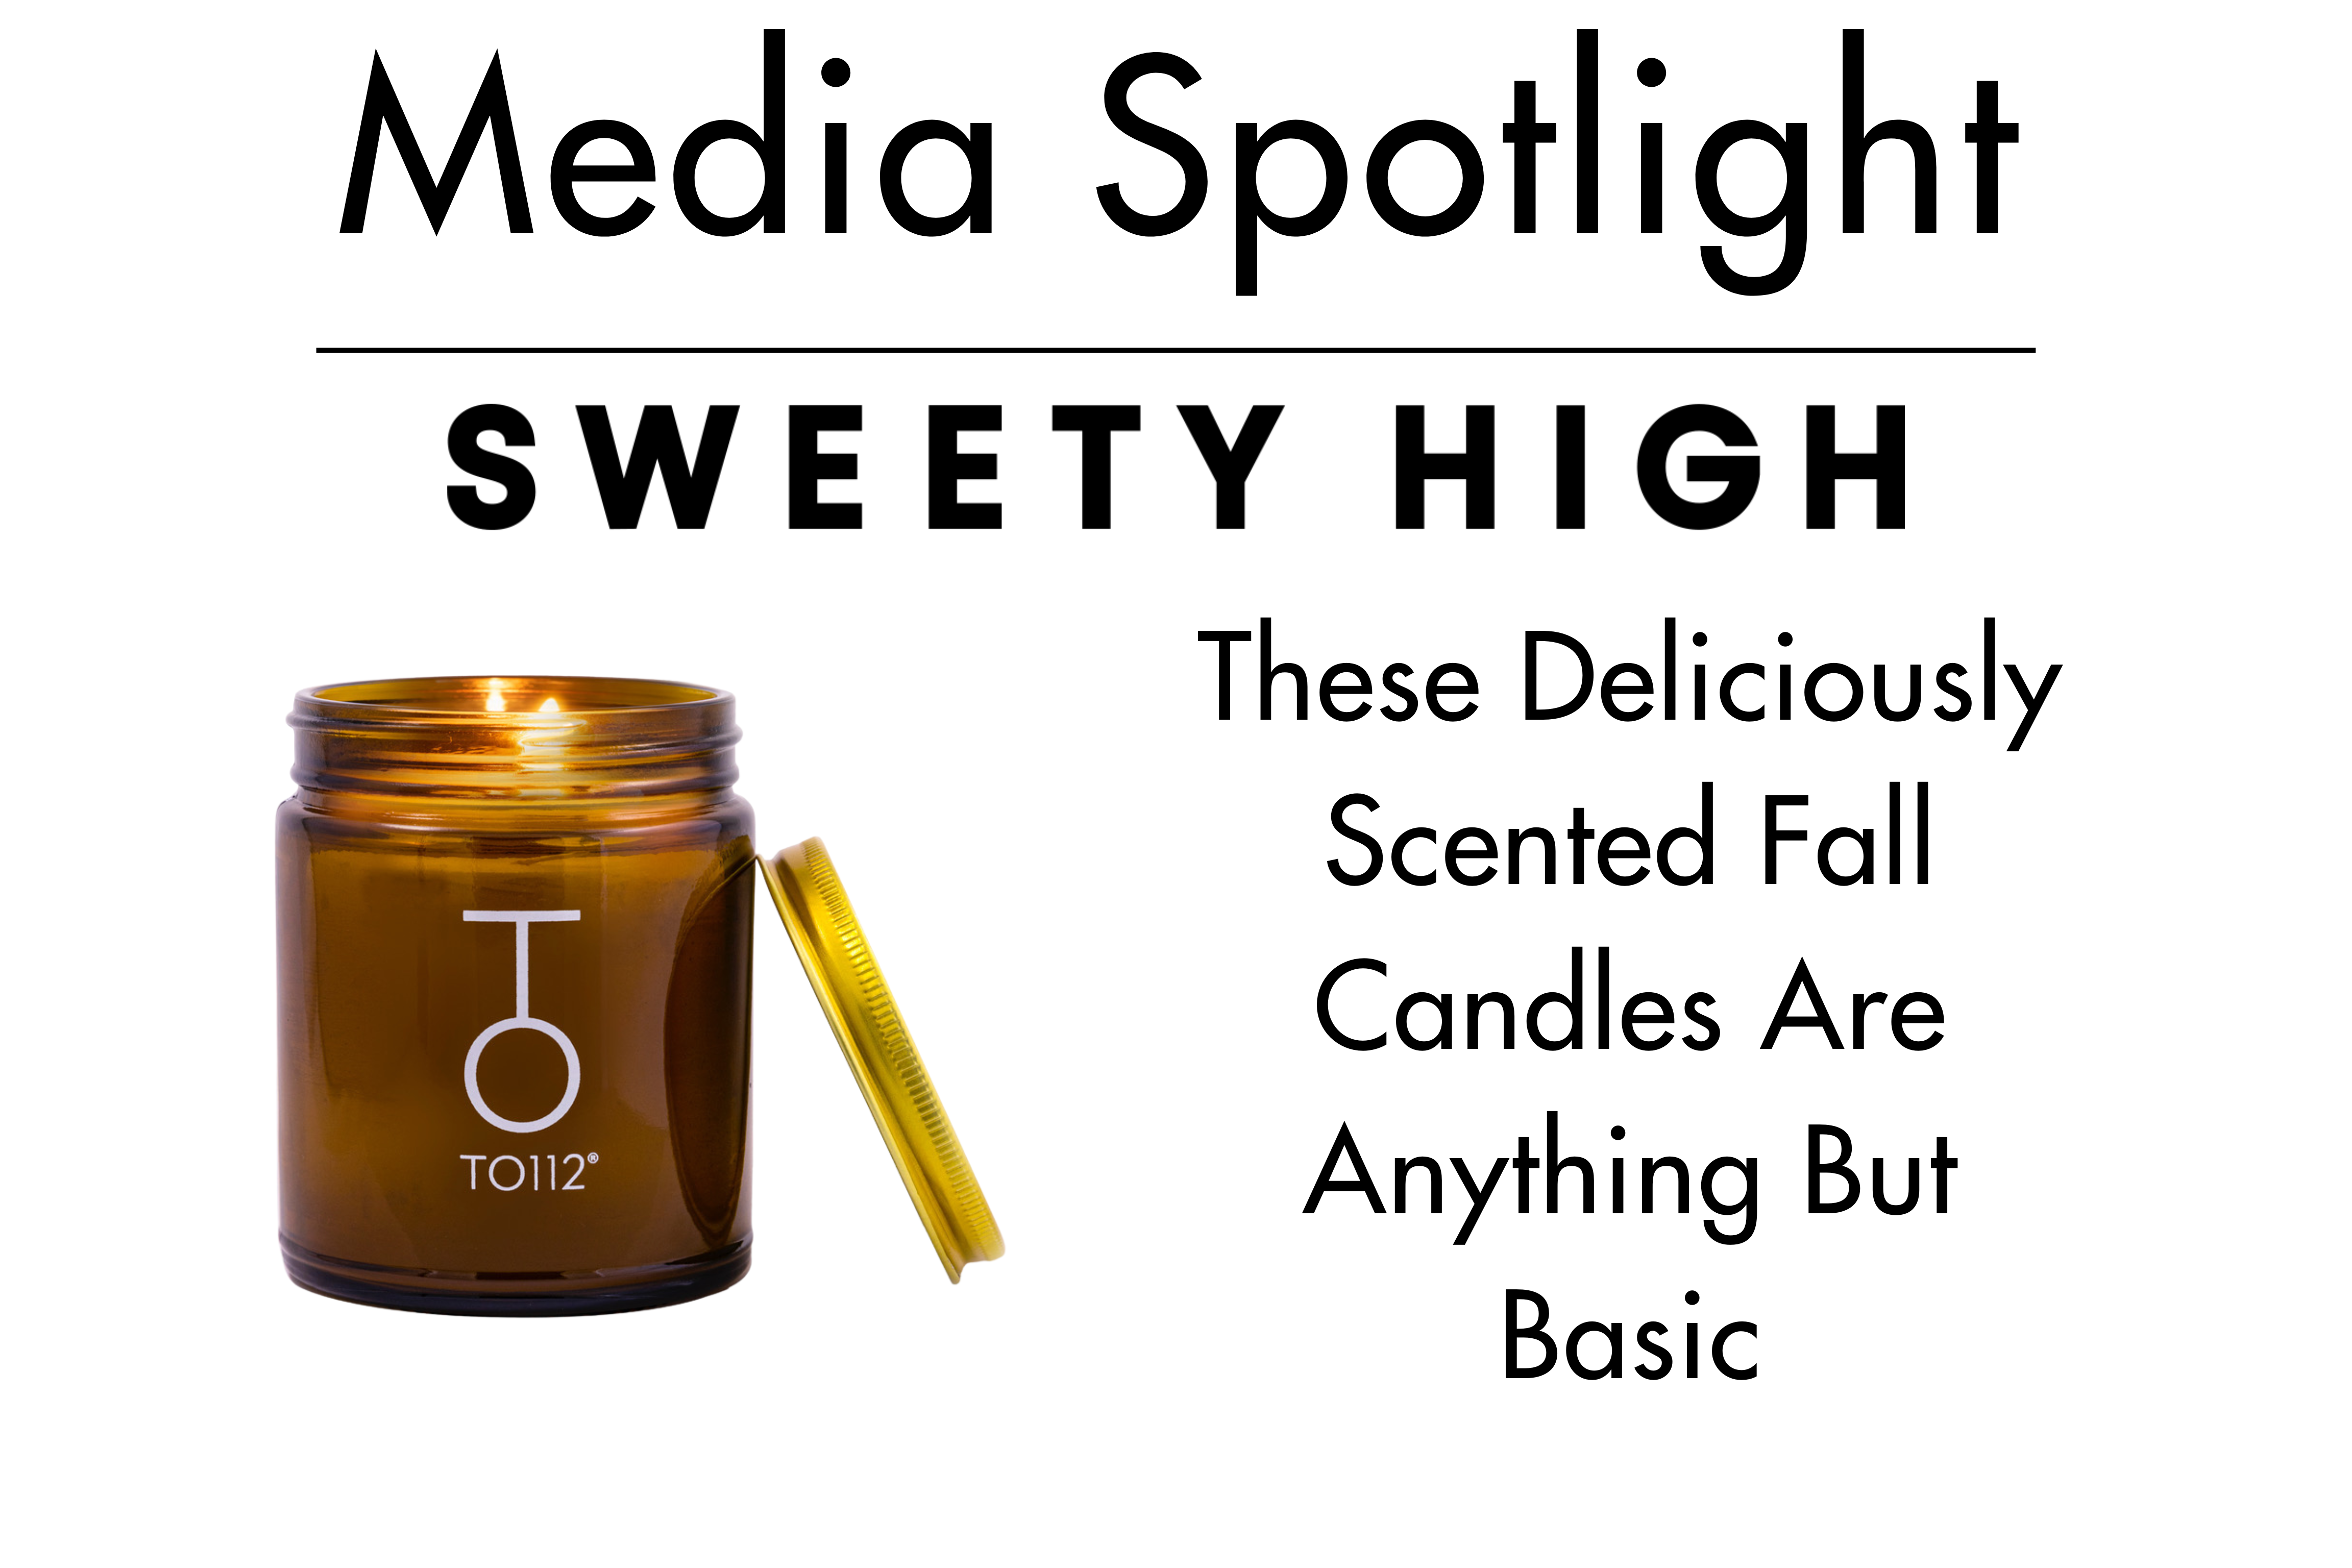 Sweety High logo article featuring TO112 Palo Santo candle